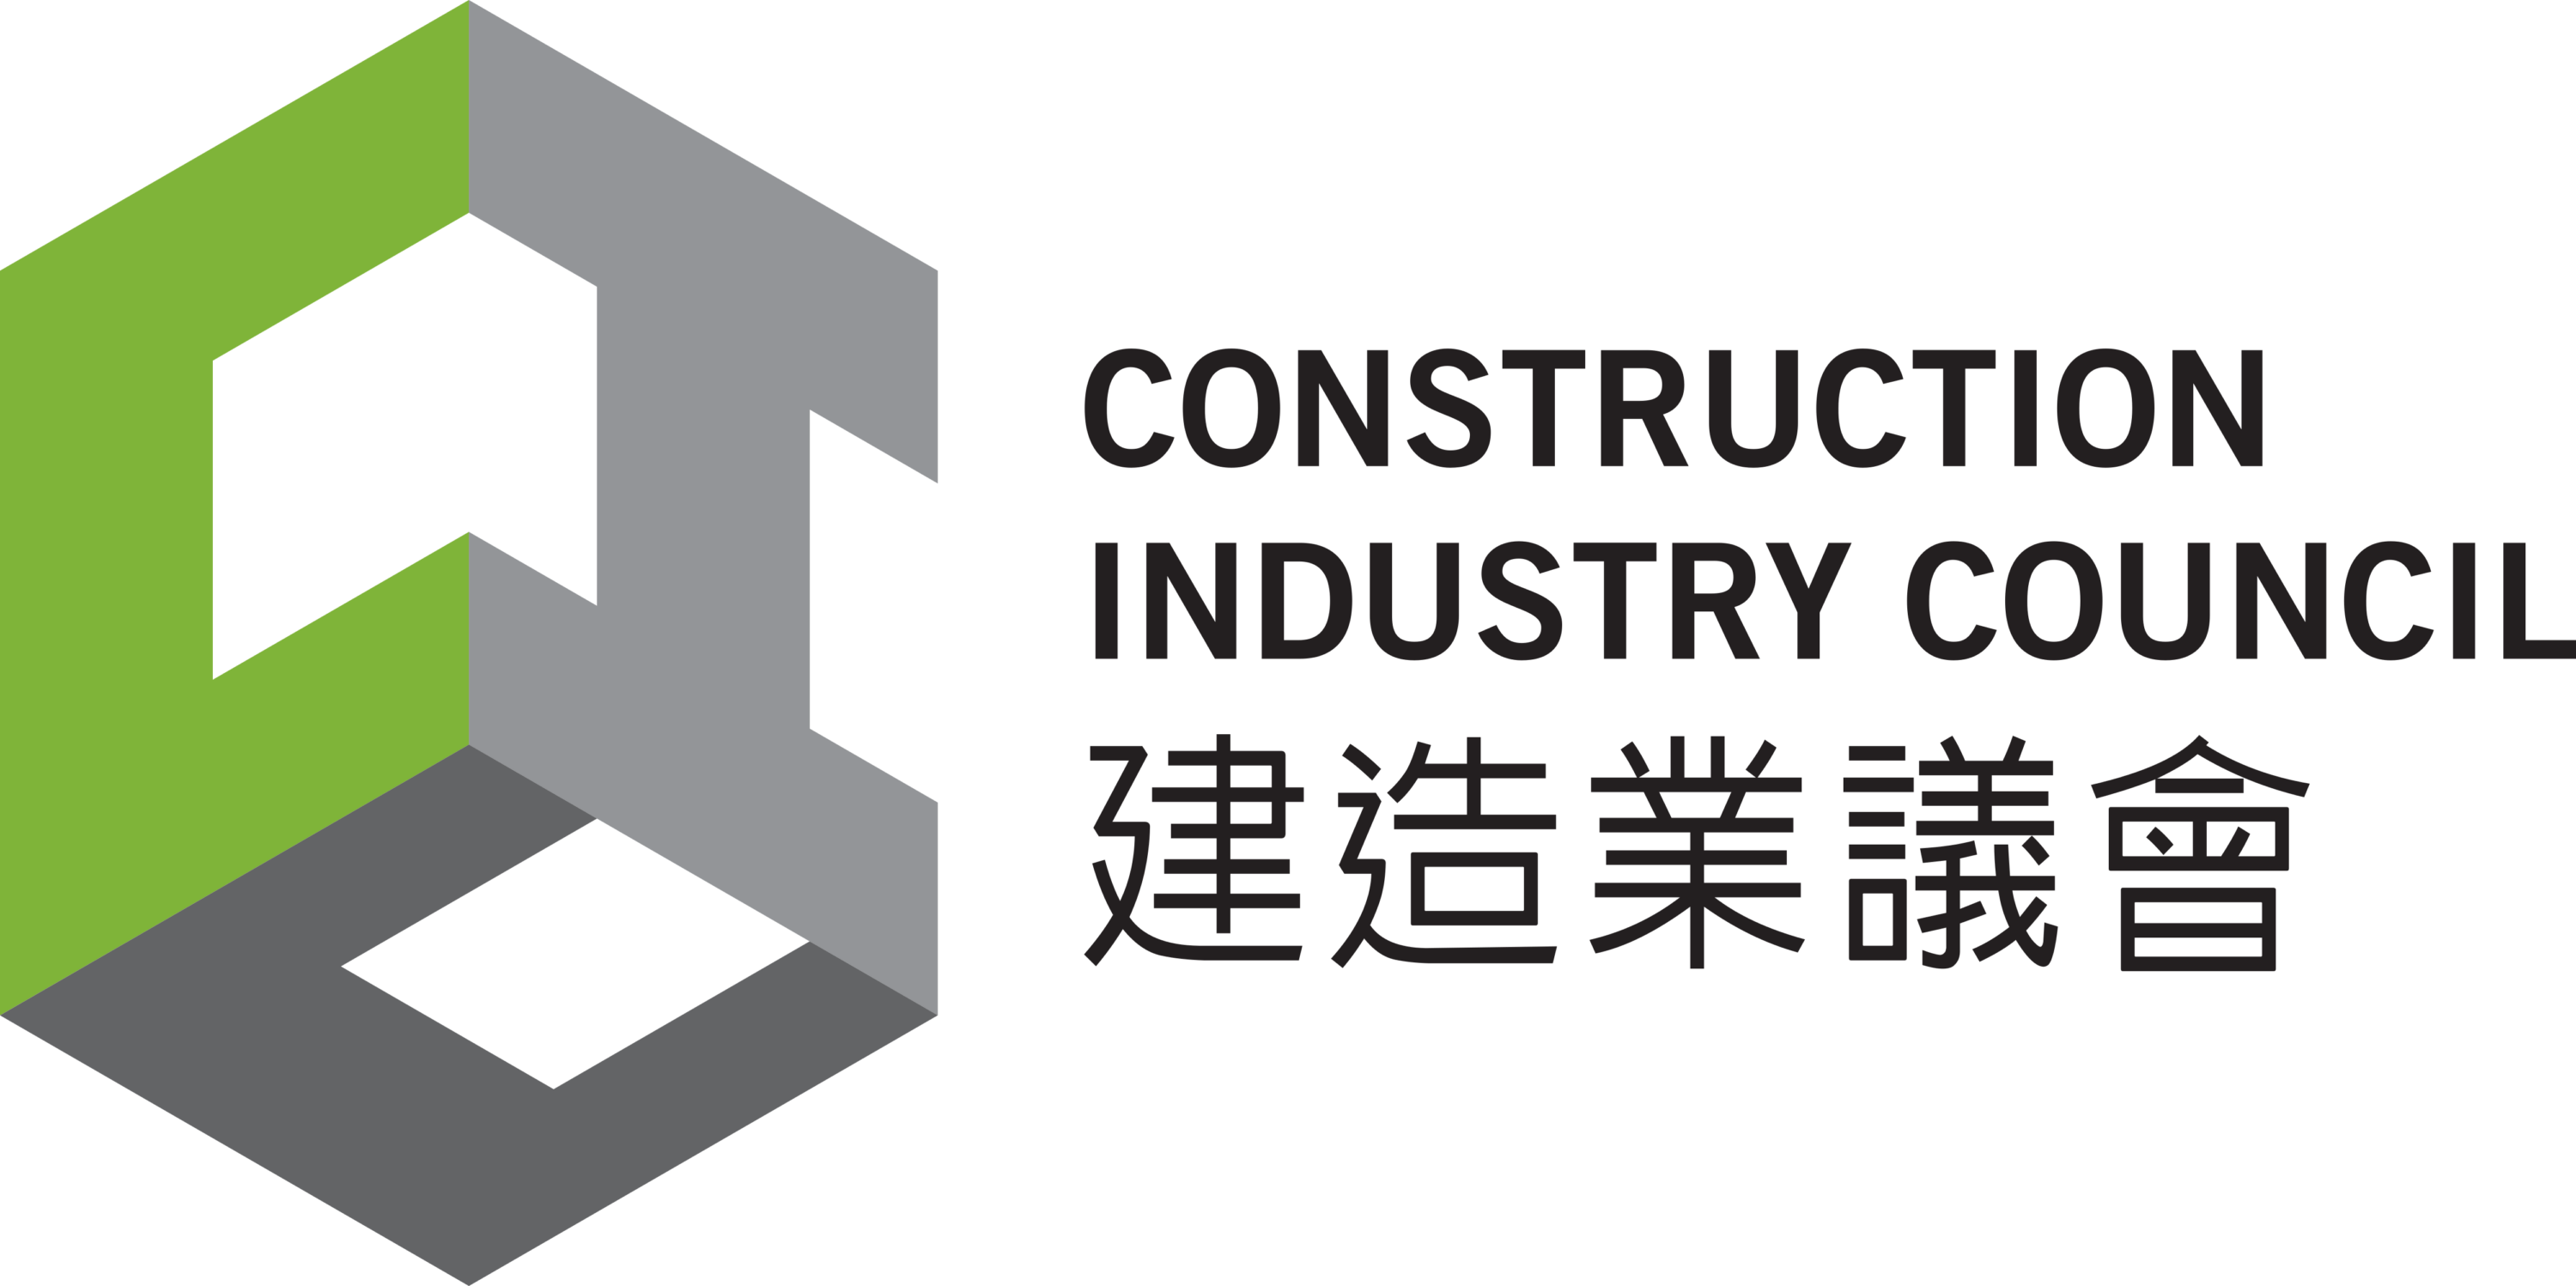 Construction Industry Council Logo